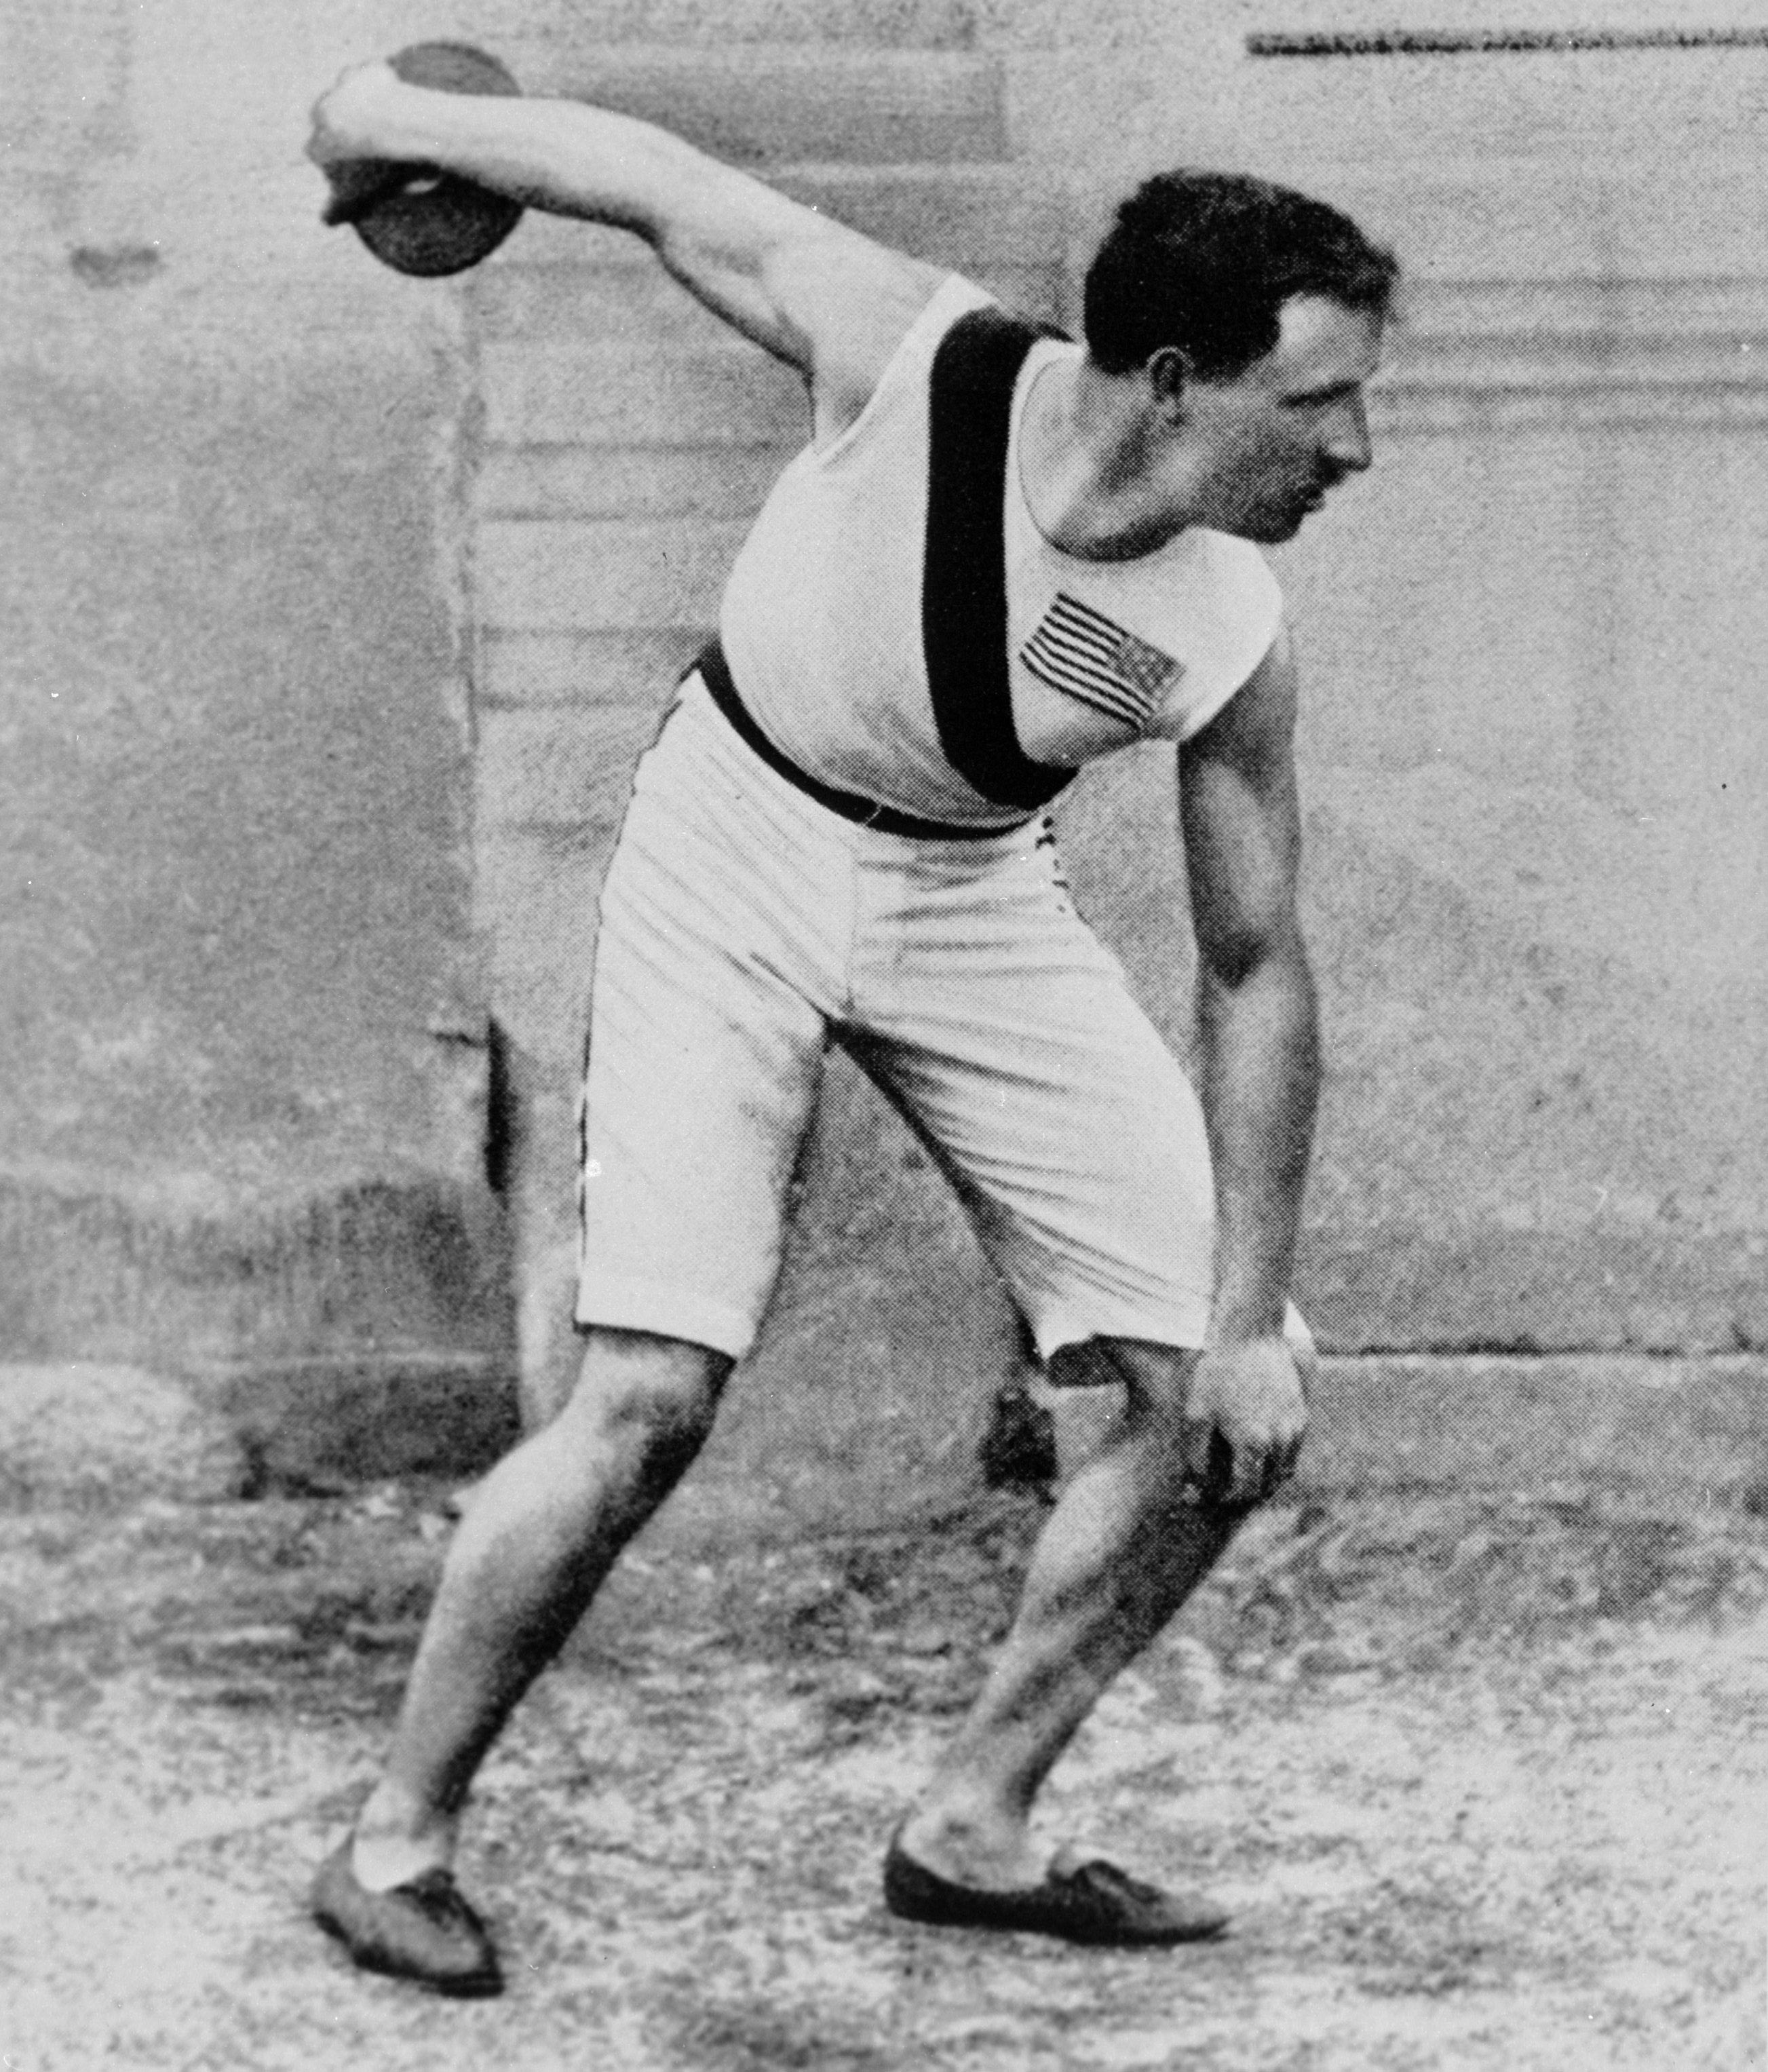 Robert Garrett (USA) wins the gold in the discus at the 1896 Athens Olympics.